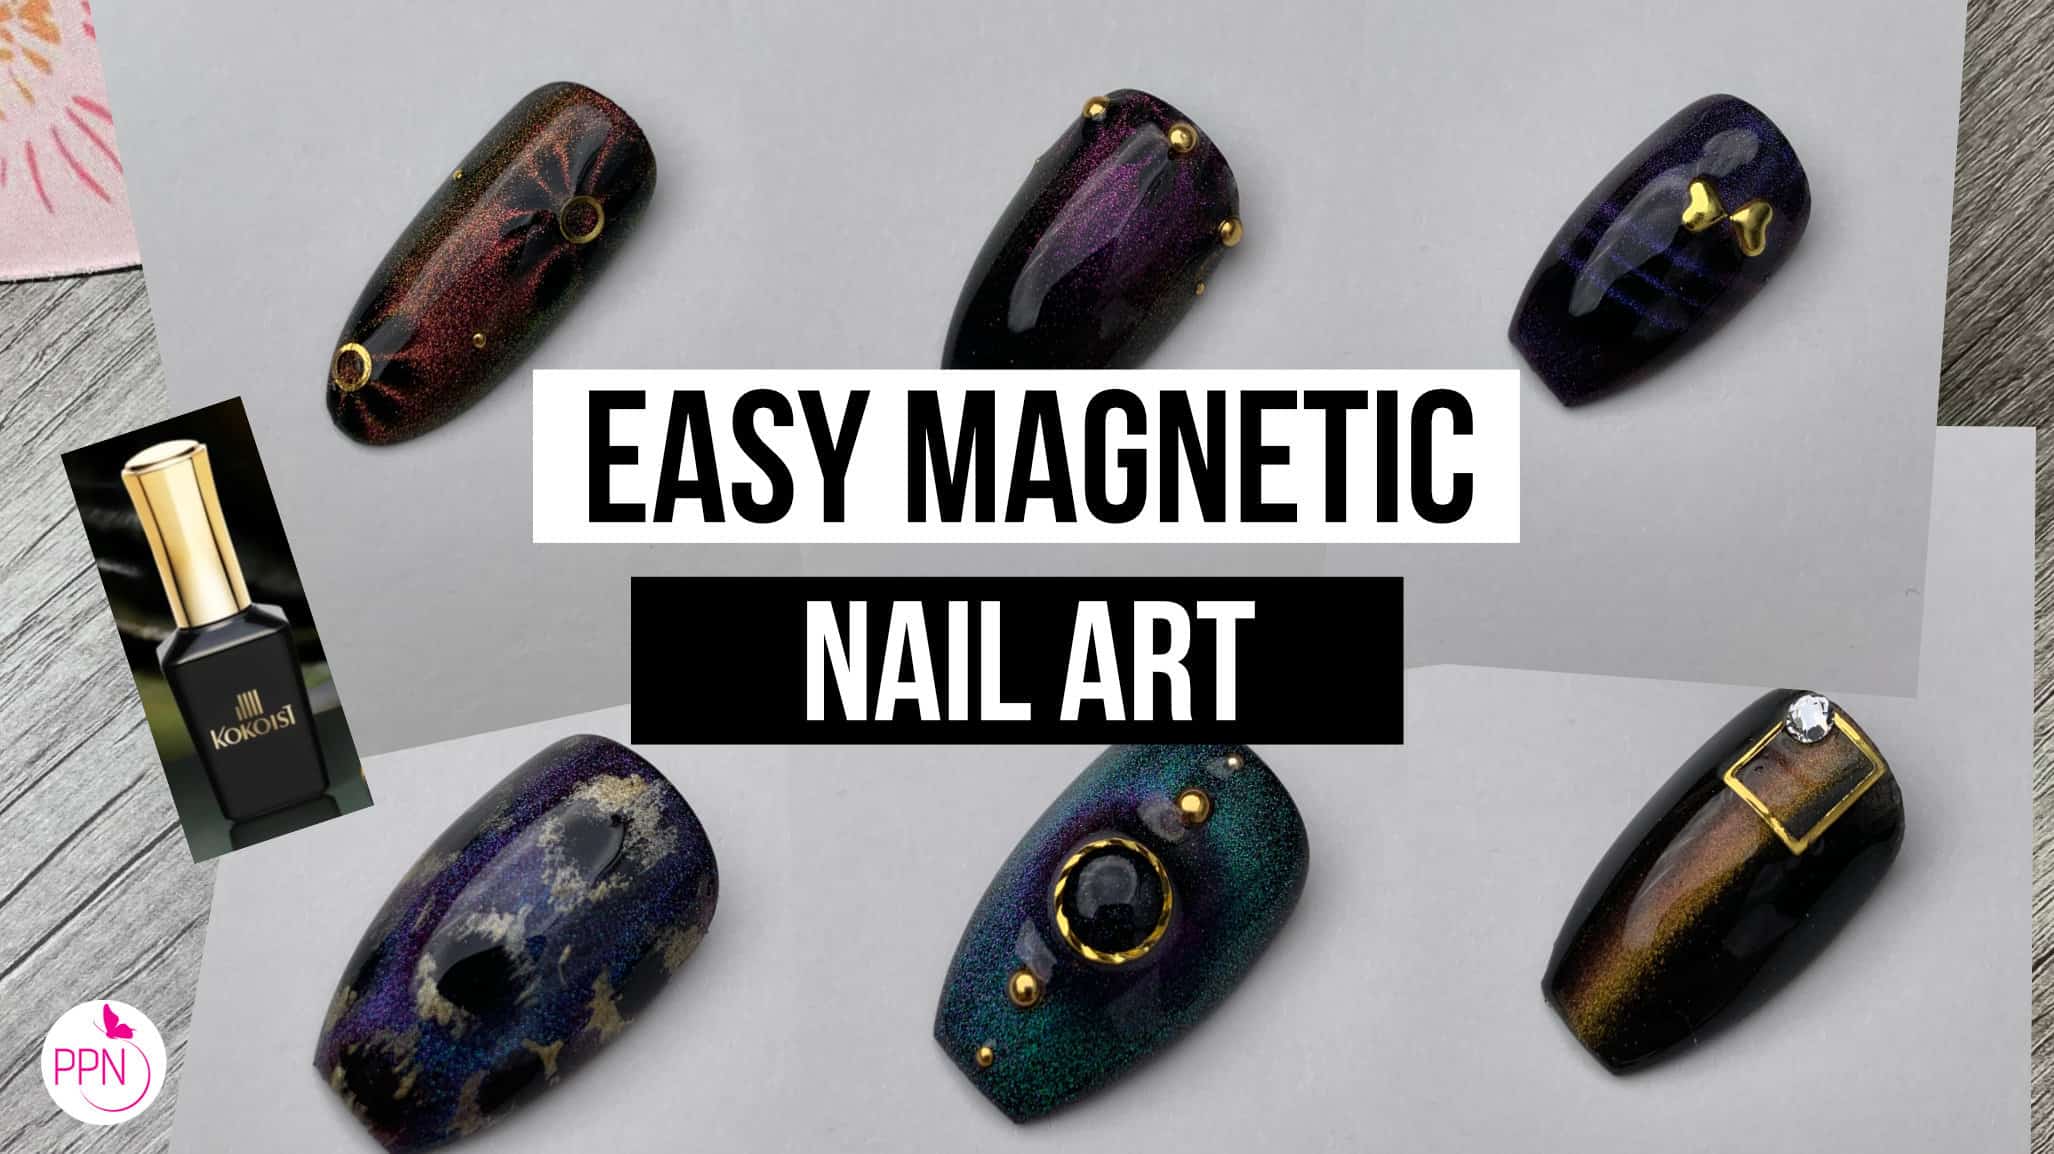 5. Magnetic Nail Art Stickers - wide 7